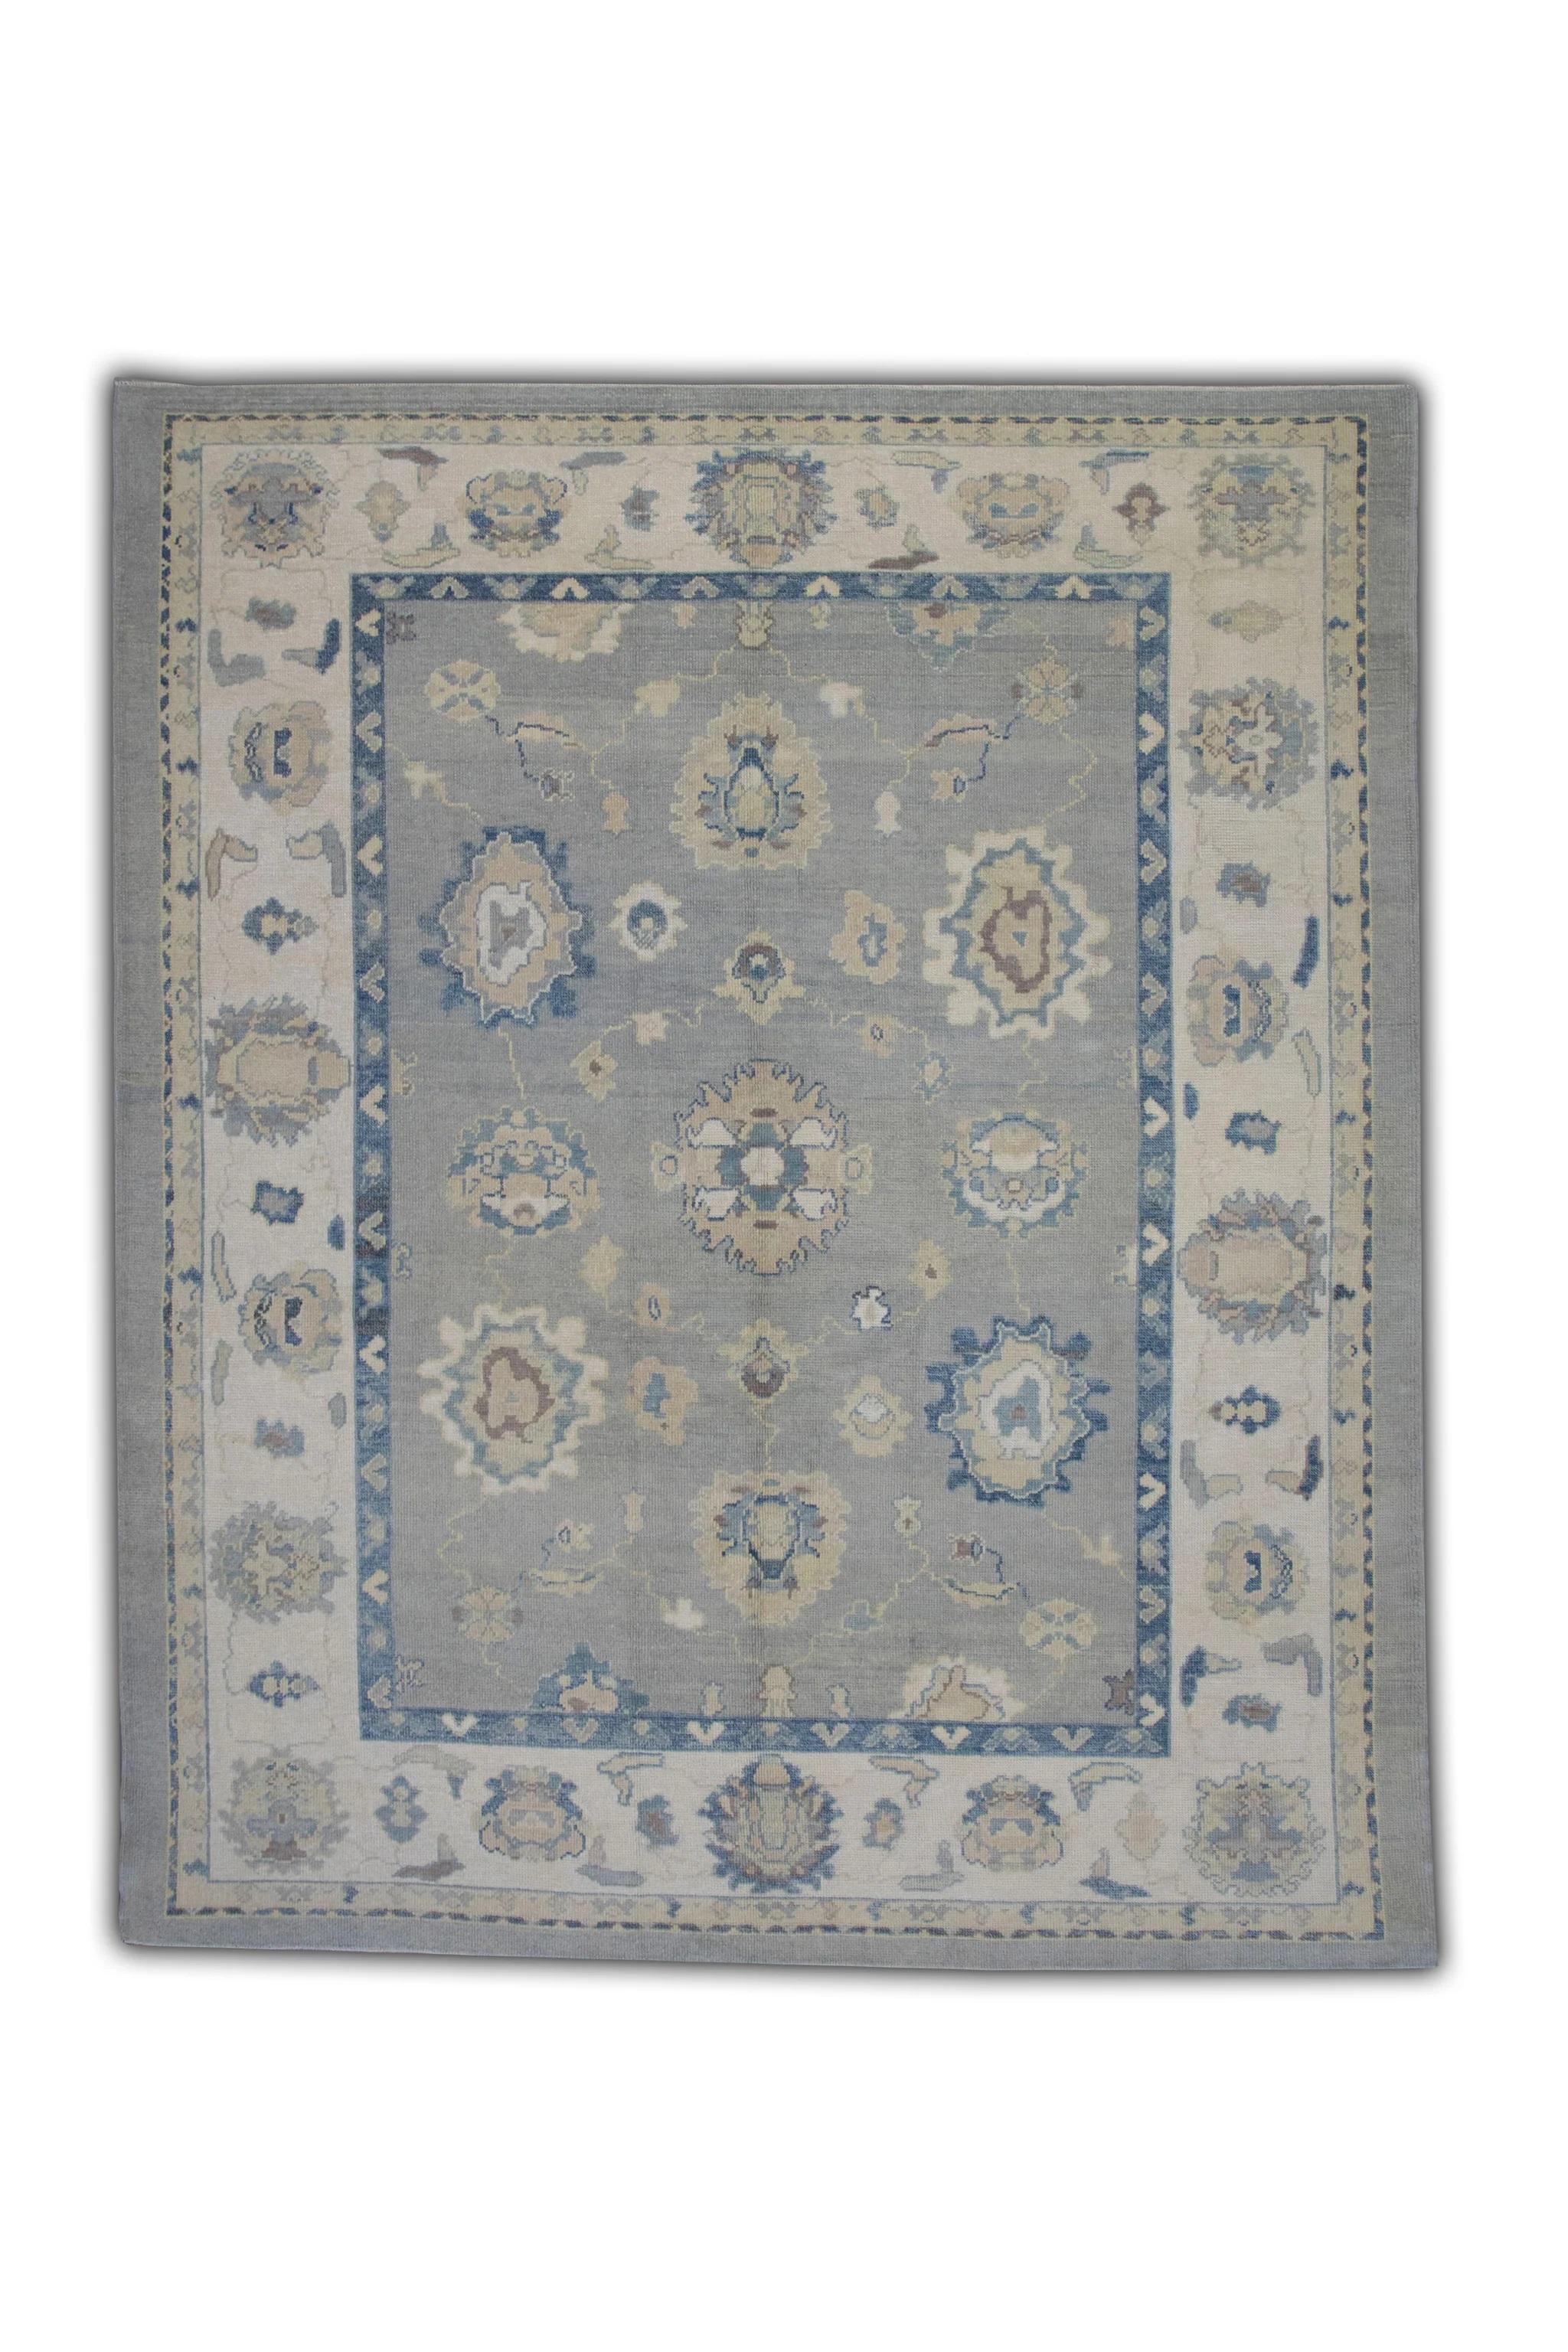 Handwoven Wool Floral Turkish Oushak Rug in Shades of Blue 9' x 10'6